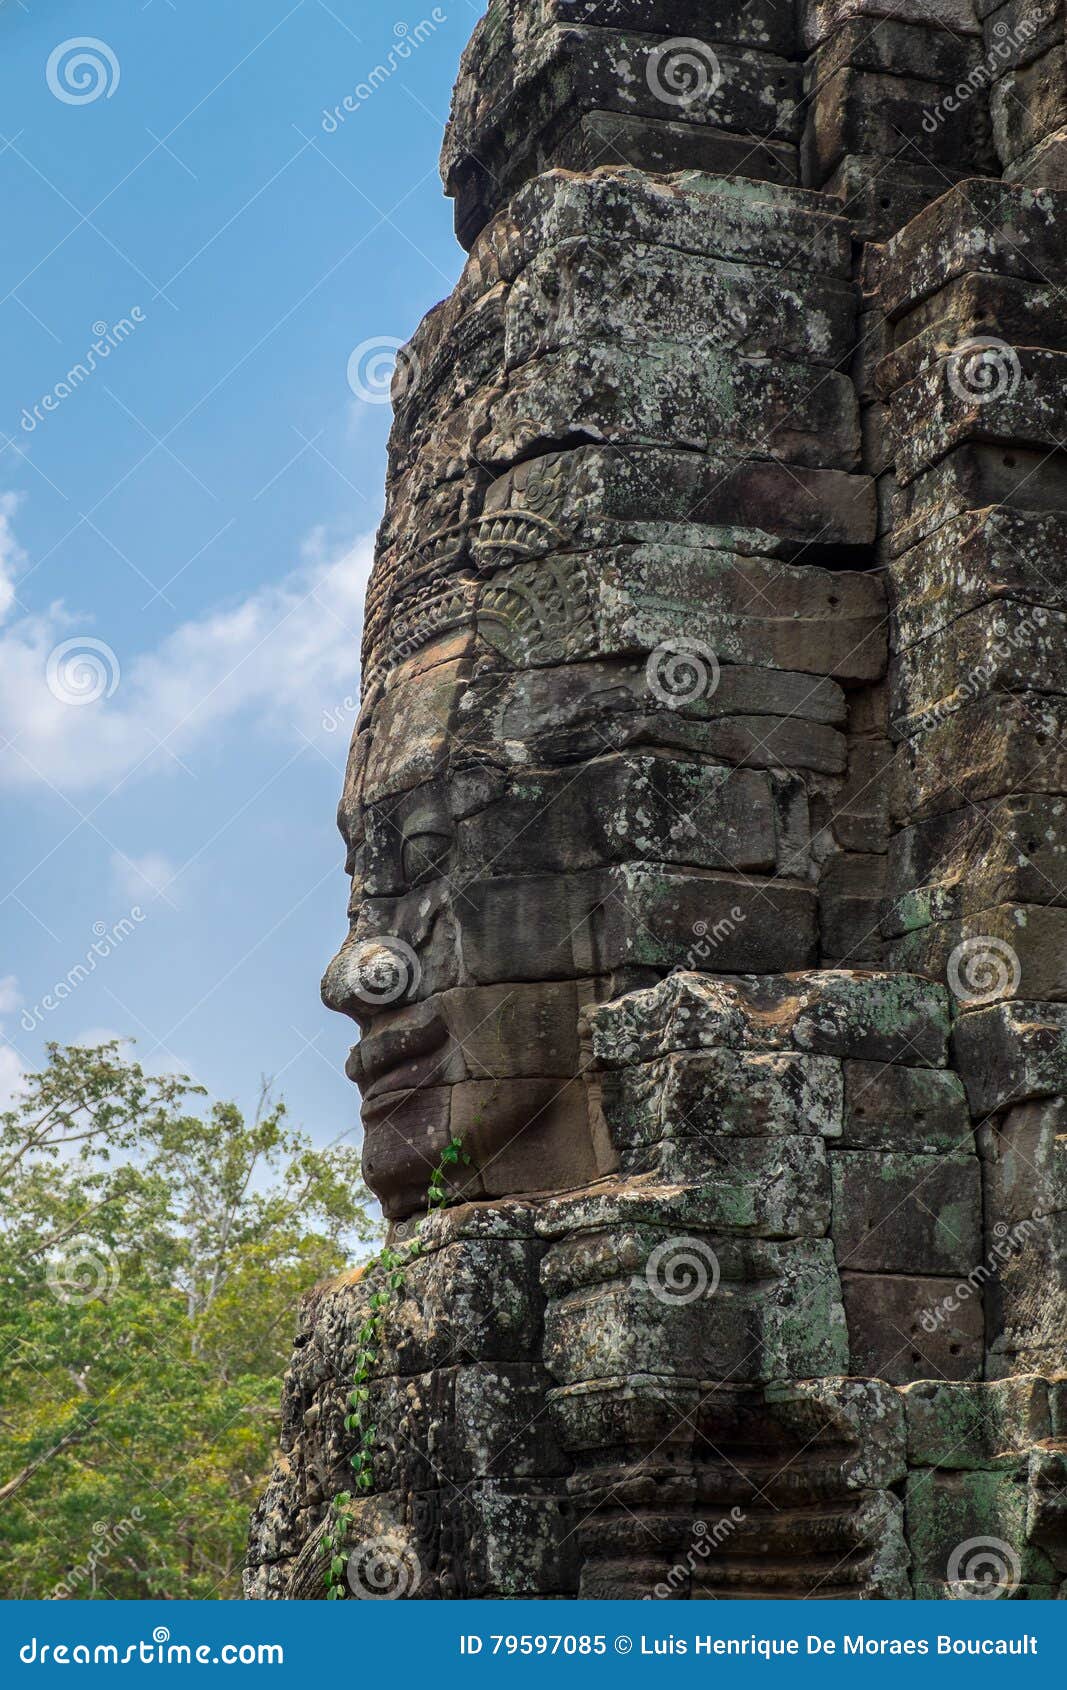 bayon temple and face